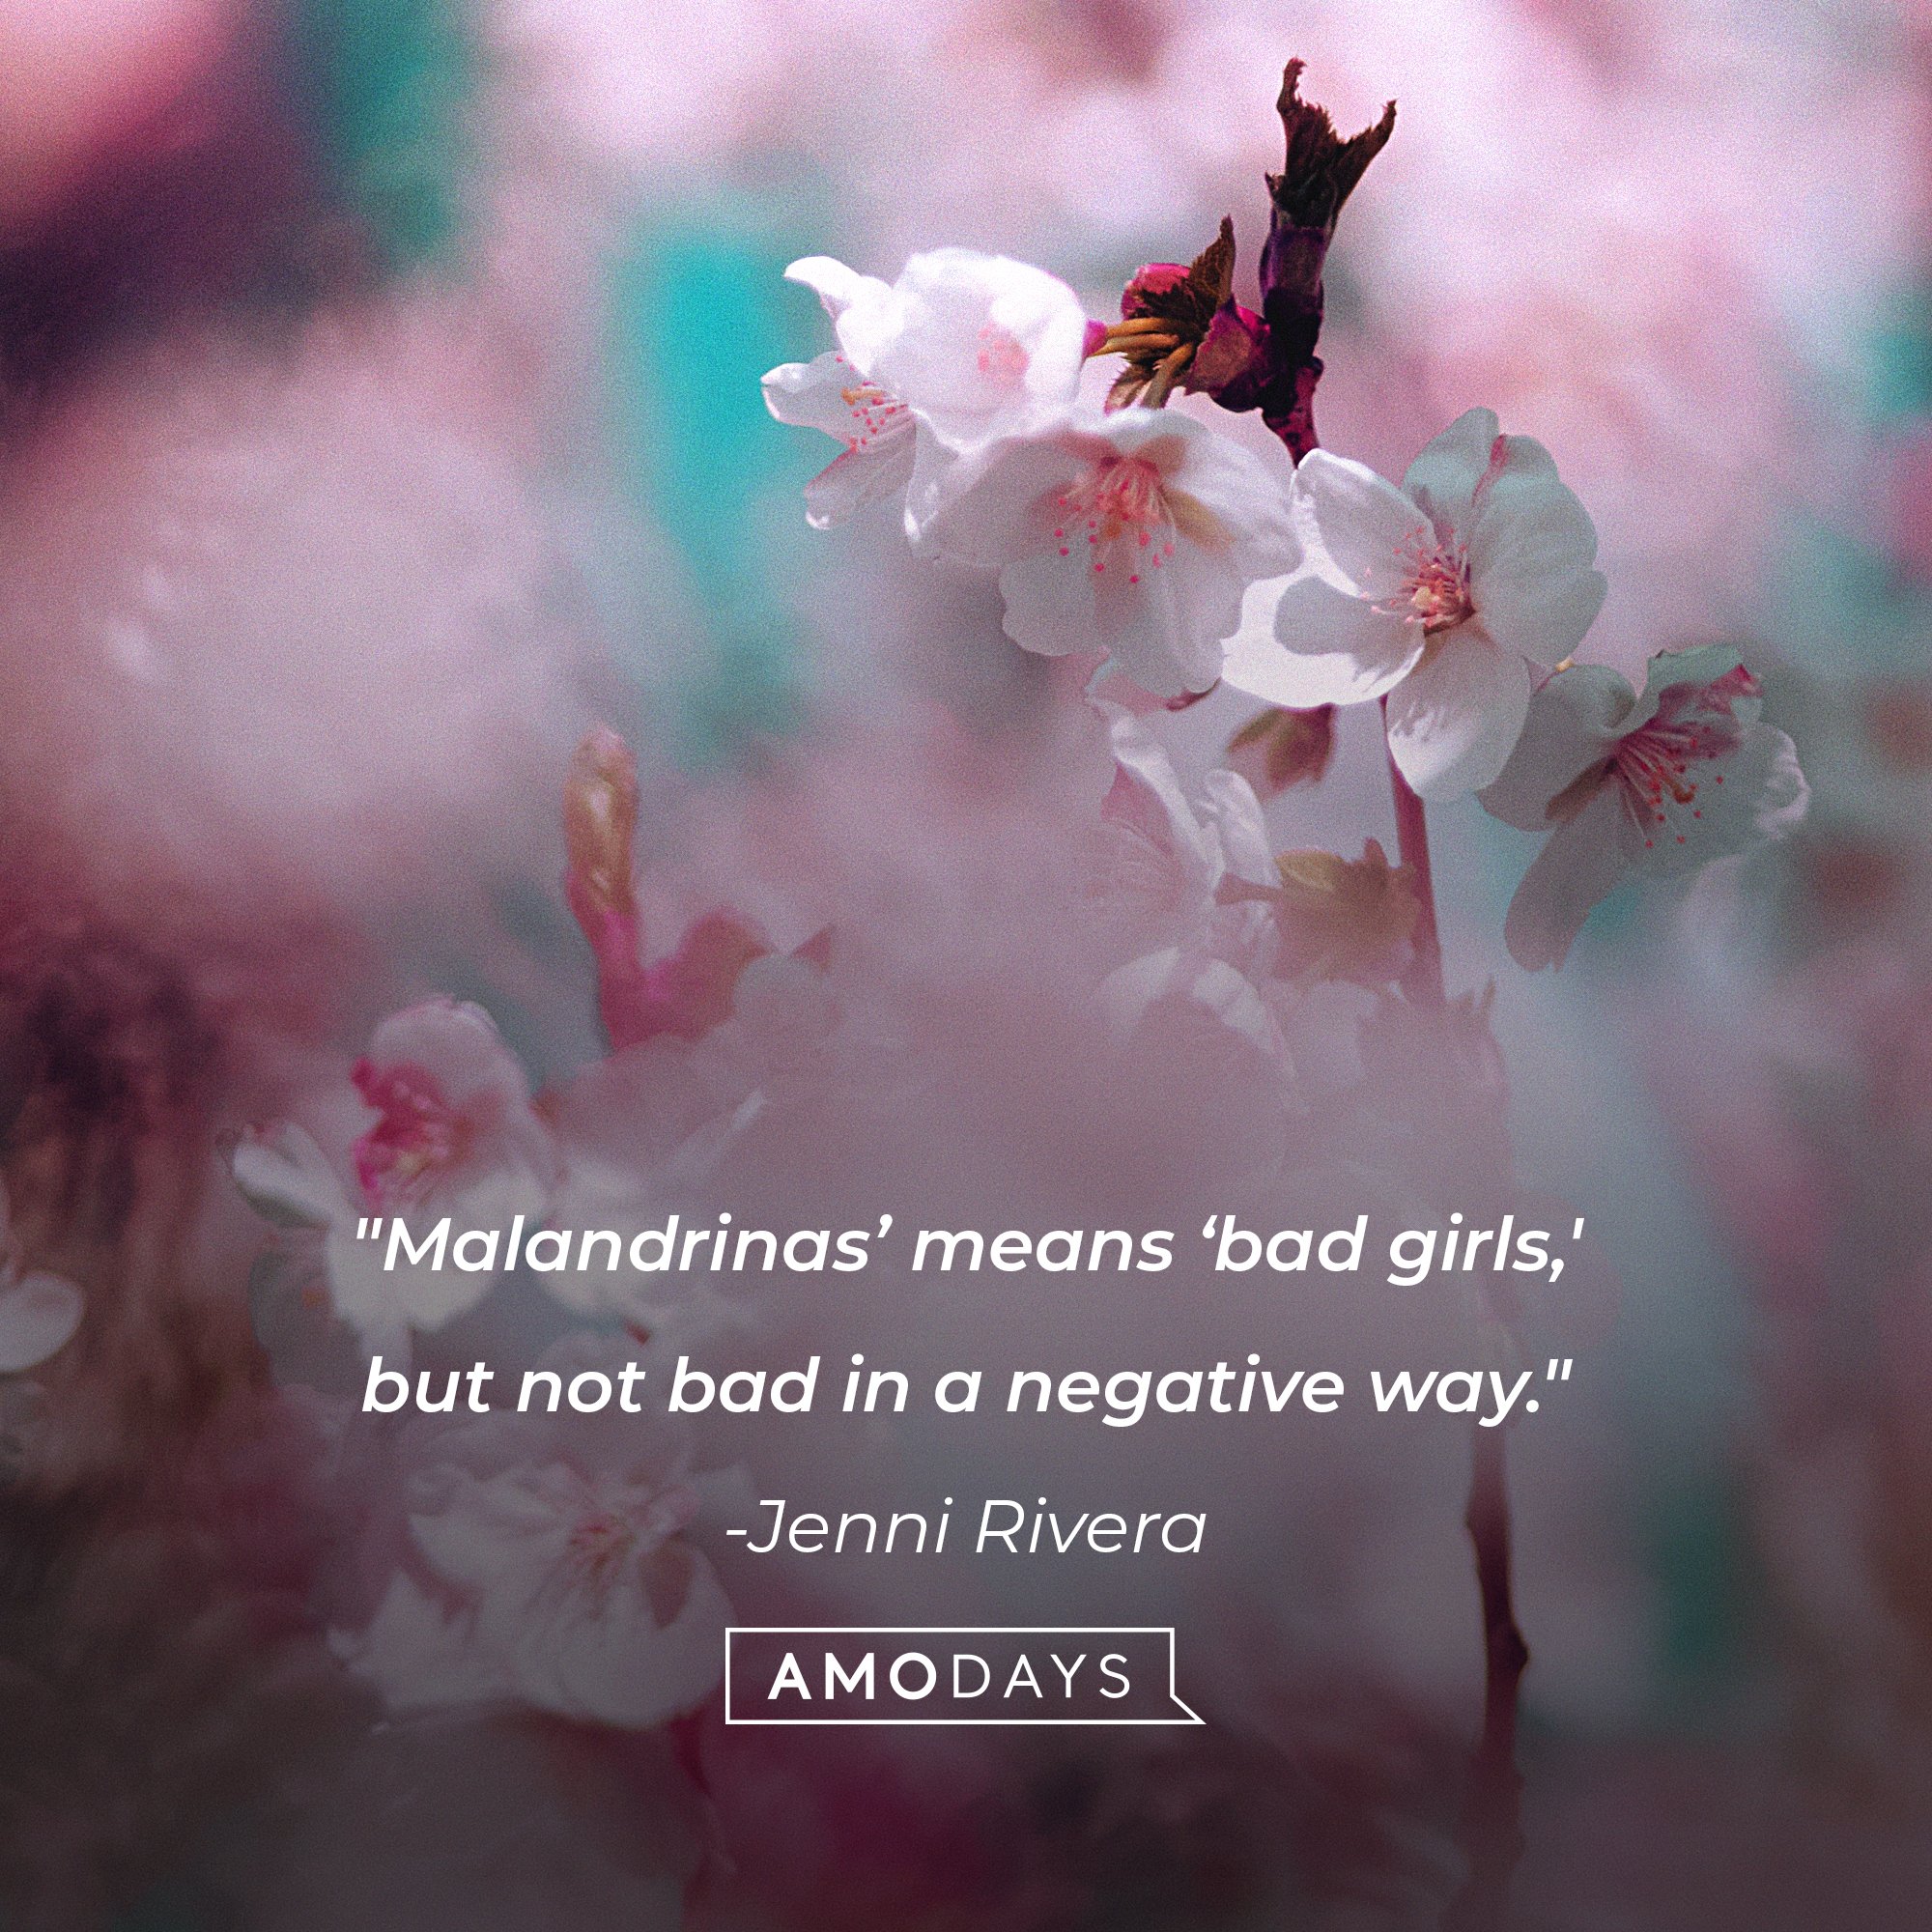 Jenni Rivera’s quote: "Malandrinas' means 'bad girls,' but not bad in a negative way." | Image: AmoDays